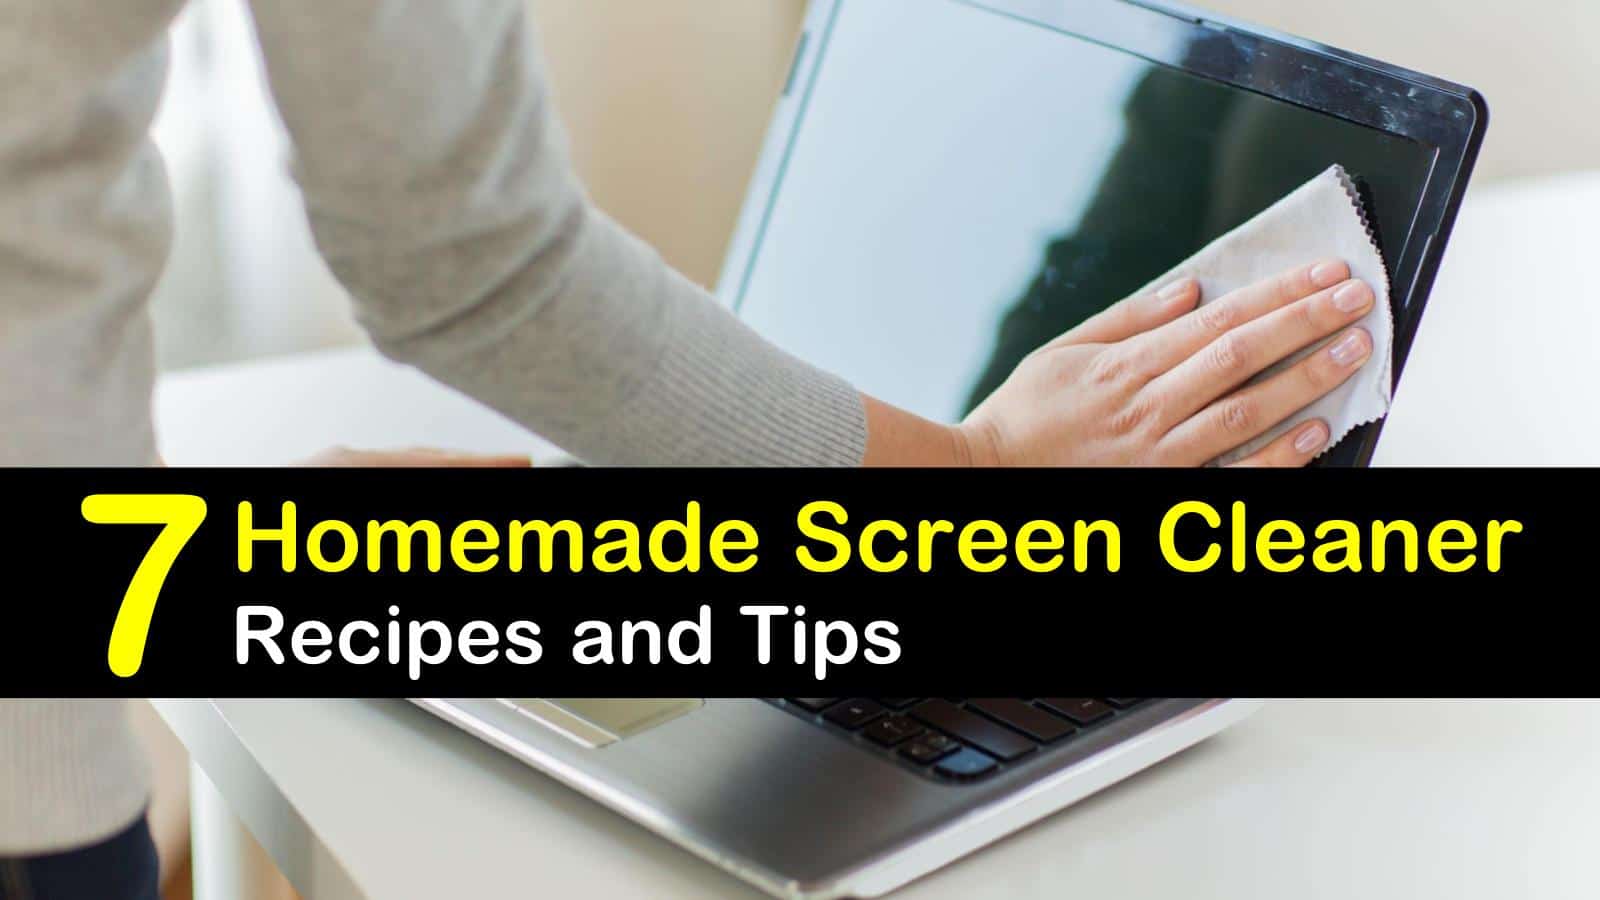 Homemade Screen Cleaner Recipes: 7 Tips For Cleaning Your ...